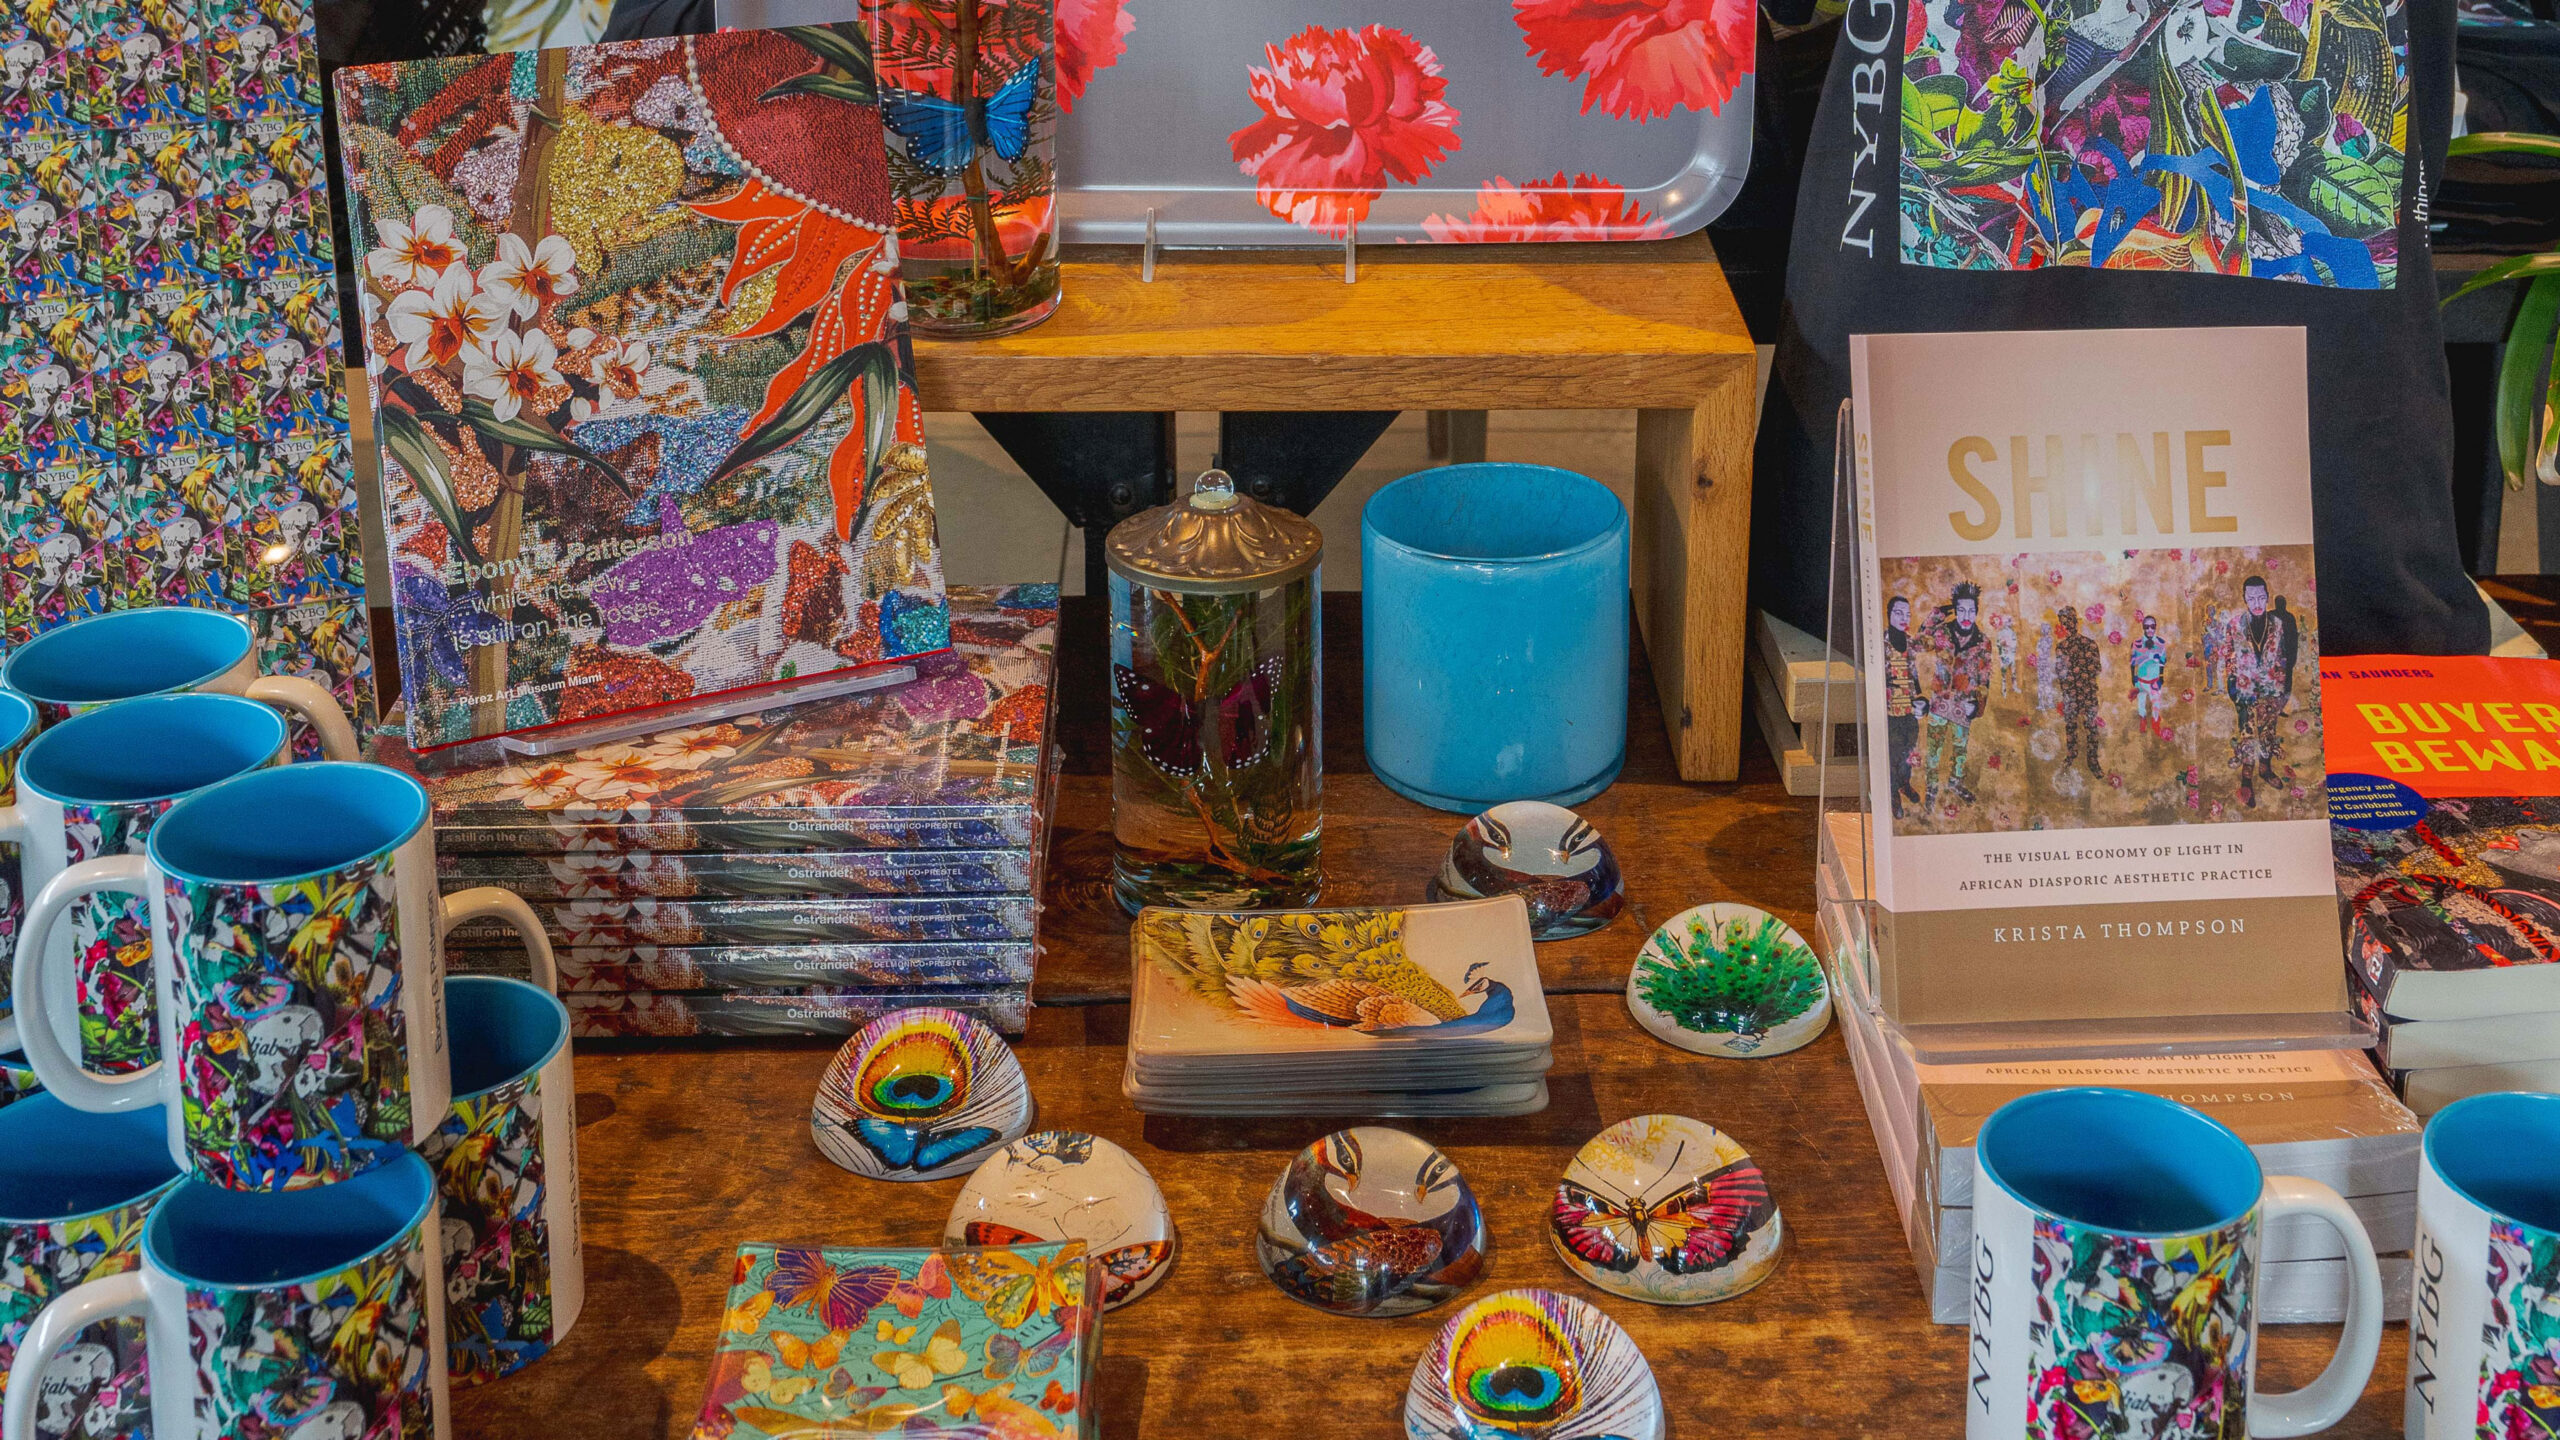 A selection of brightly colored home goods, books, napkins, paper weights, and more